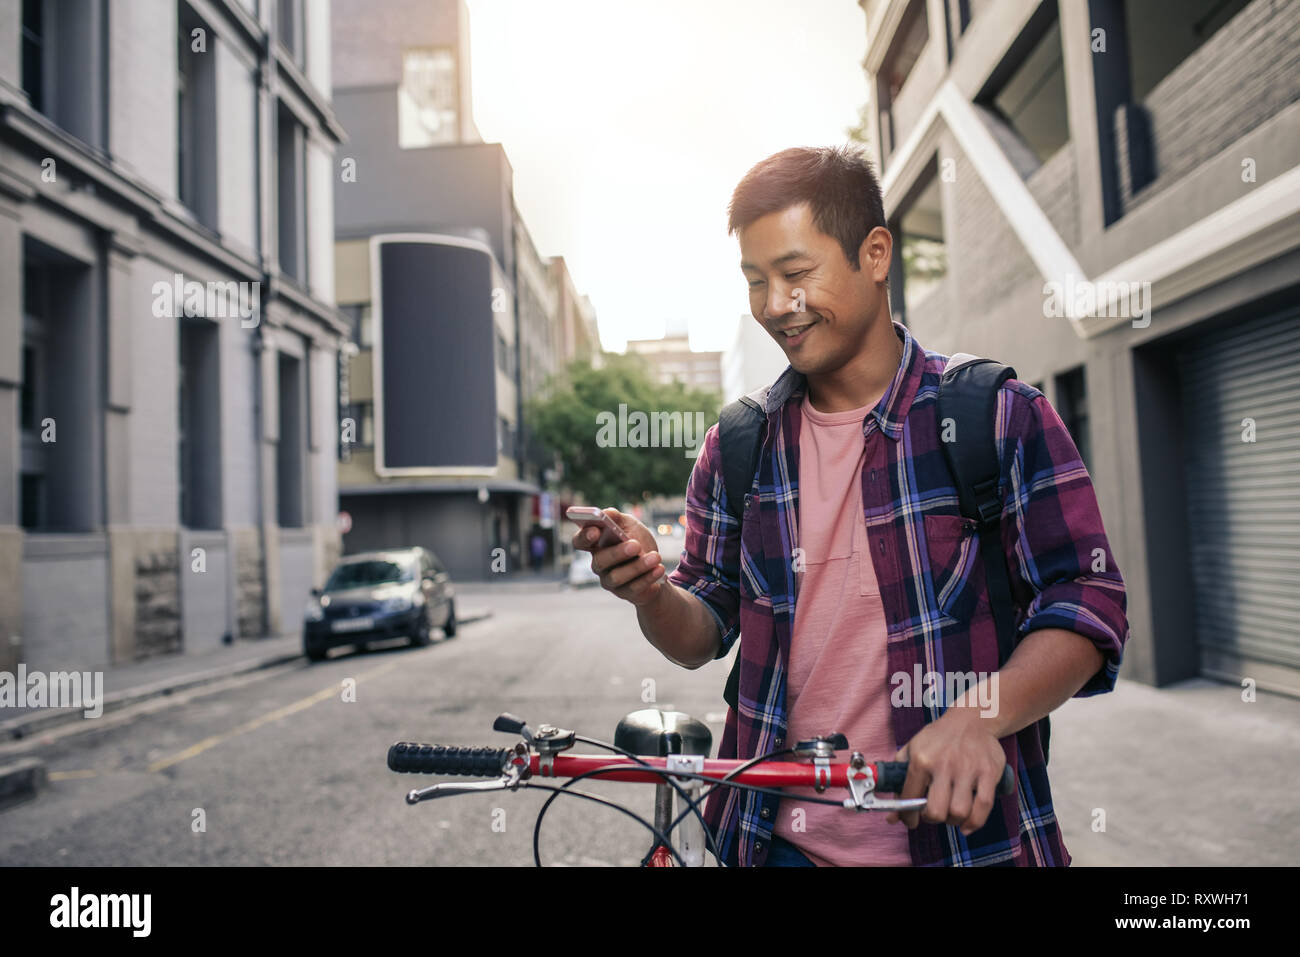 Smiling young man standing with his bike using a cellphone Stock Photo